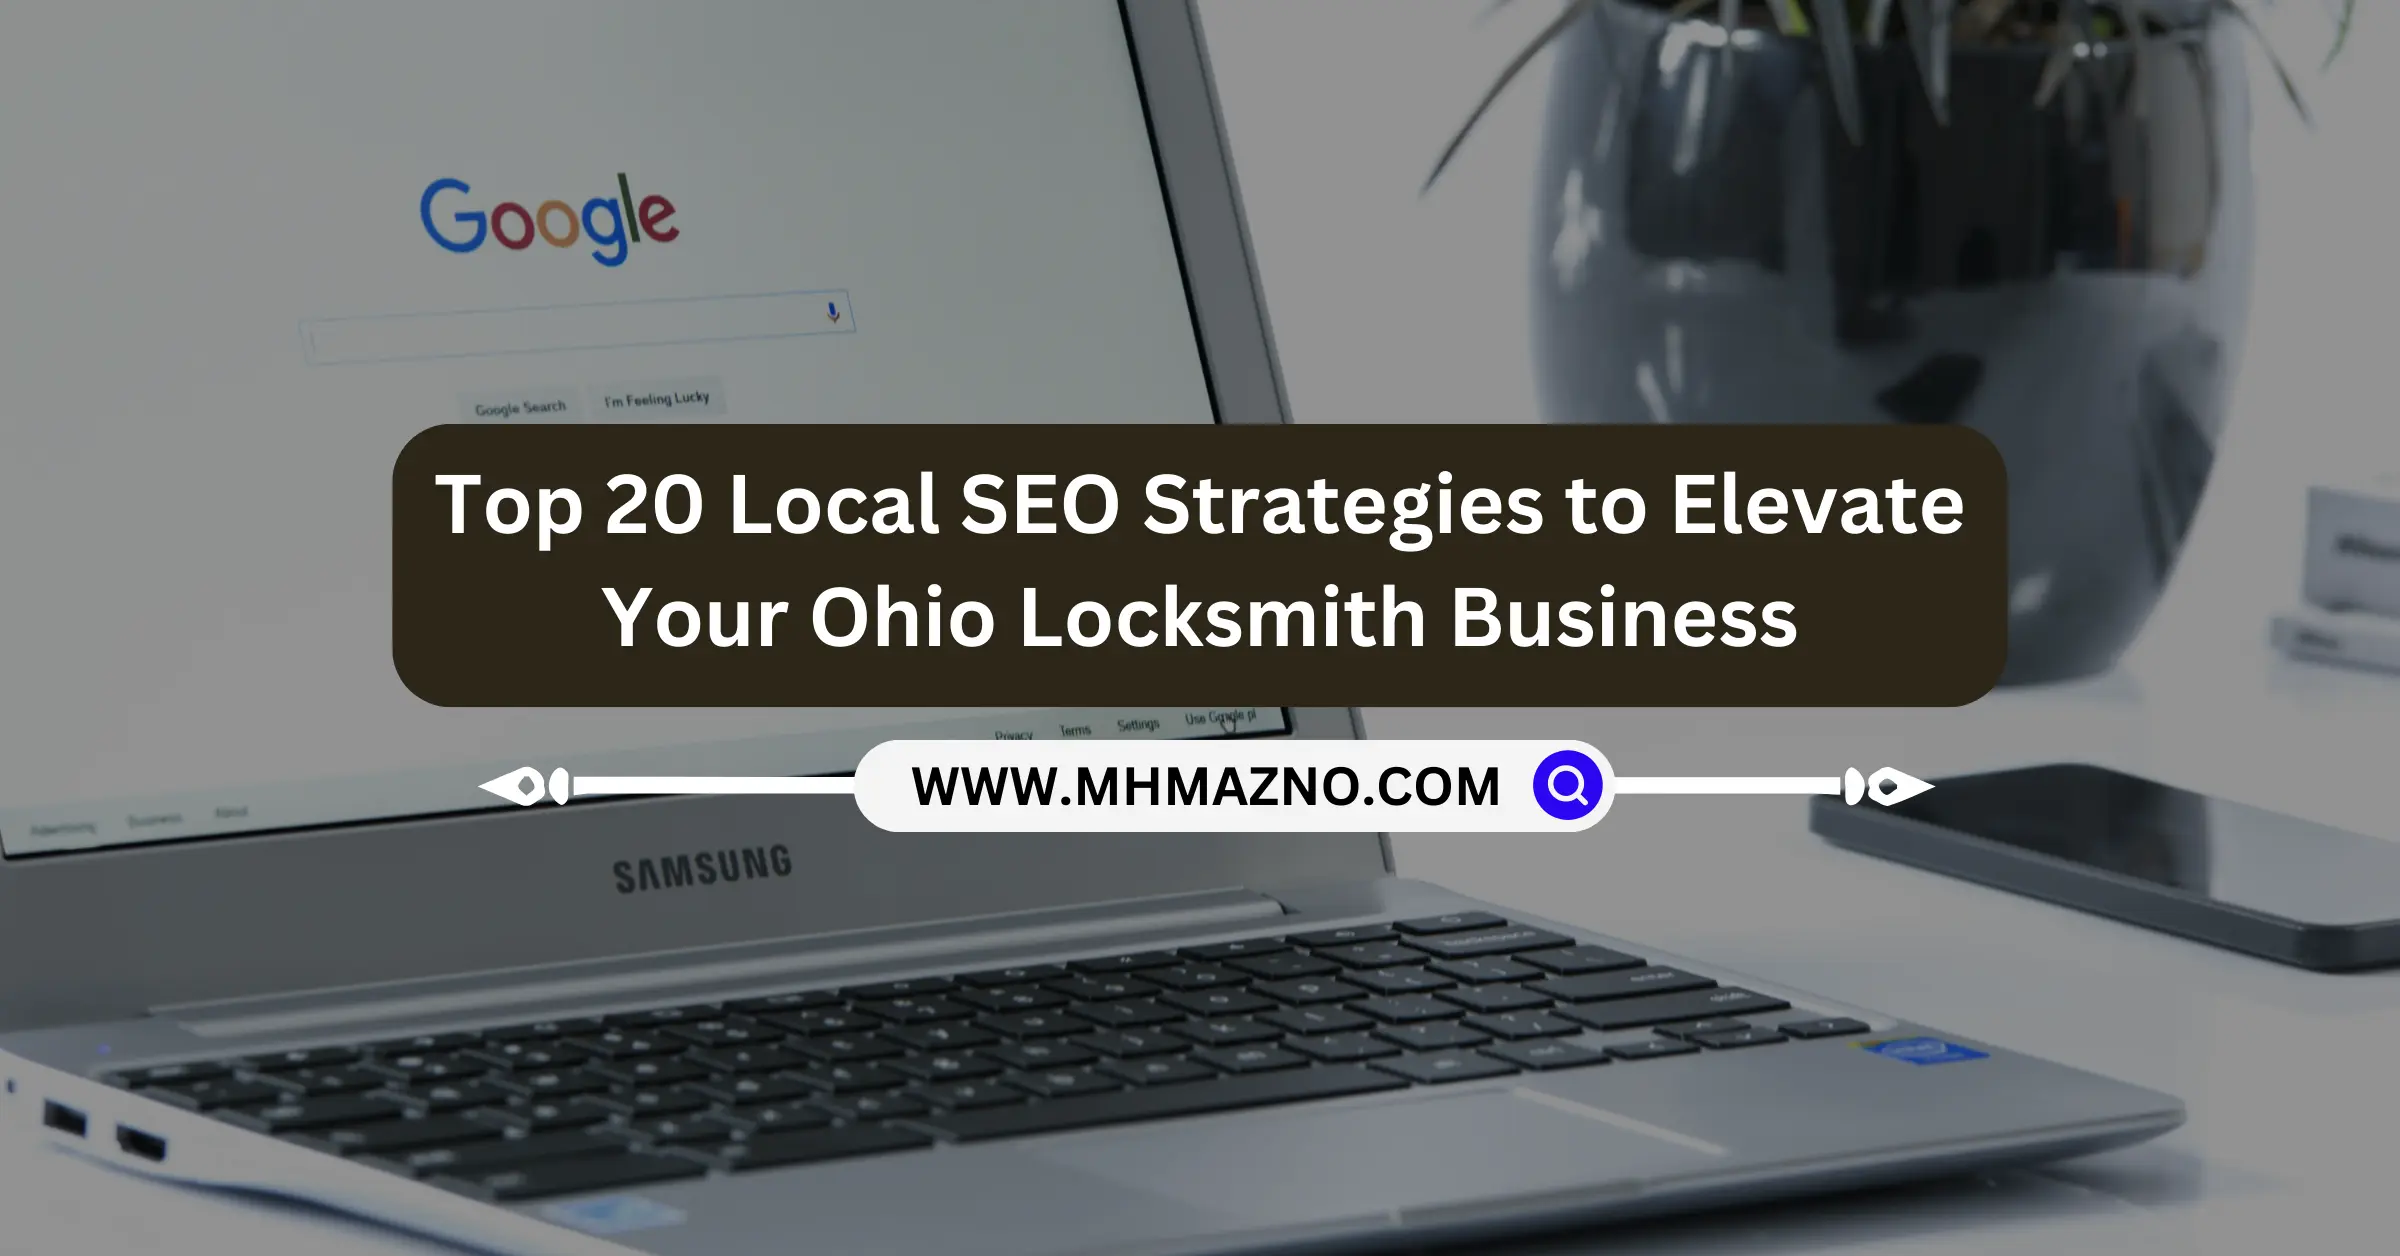 Top 20 Local SEO Strategies to Elevate Your Ohio Locksmith Business